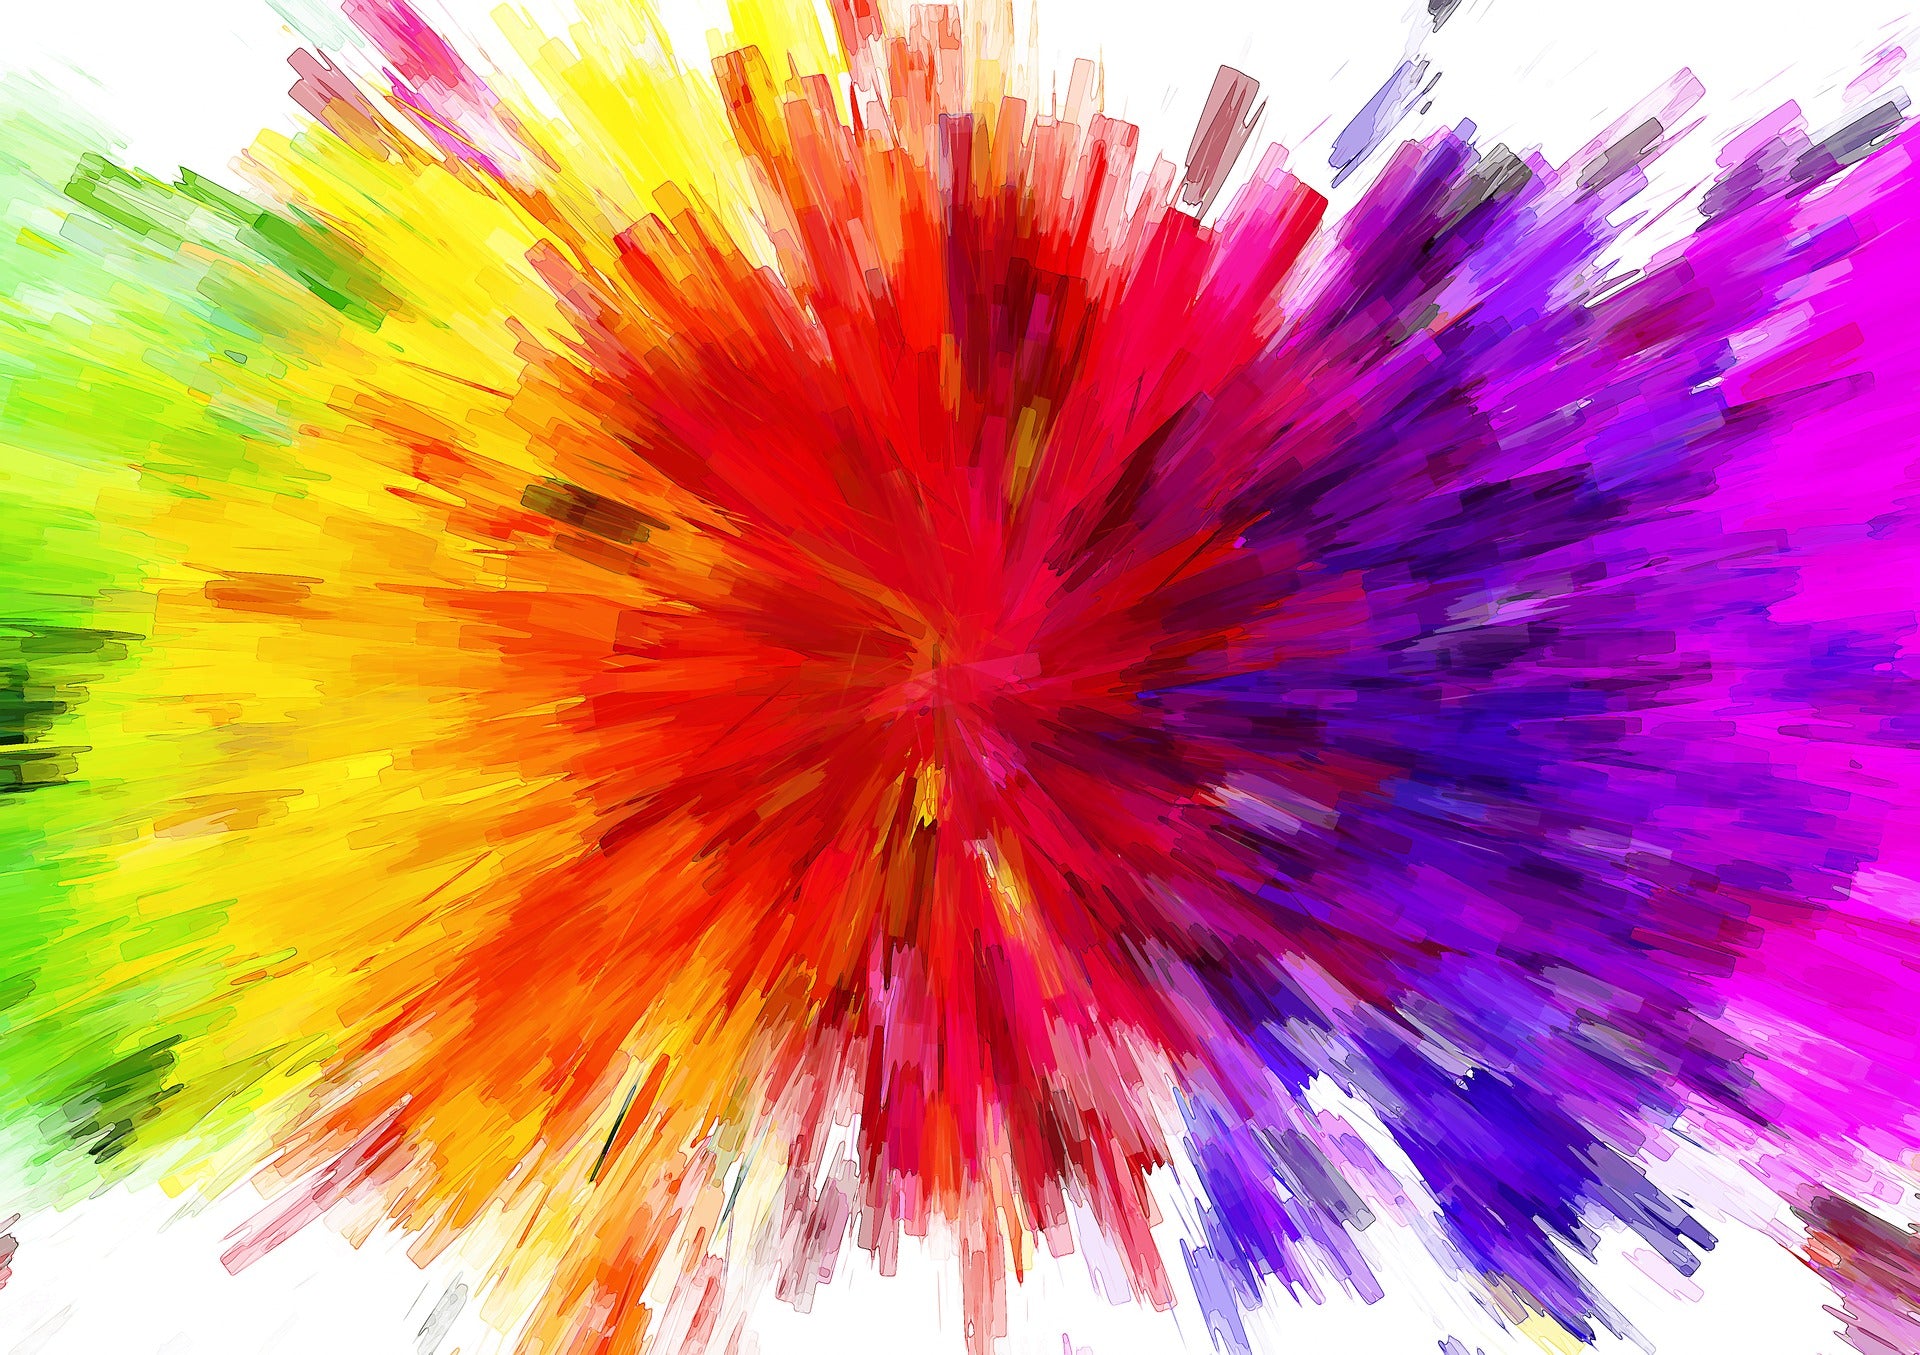 Painting My World: Do You Want an Explosion of Color?